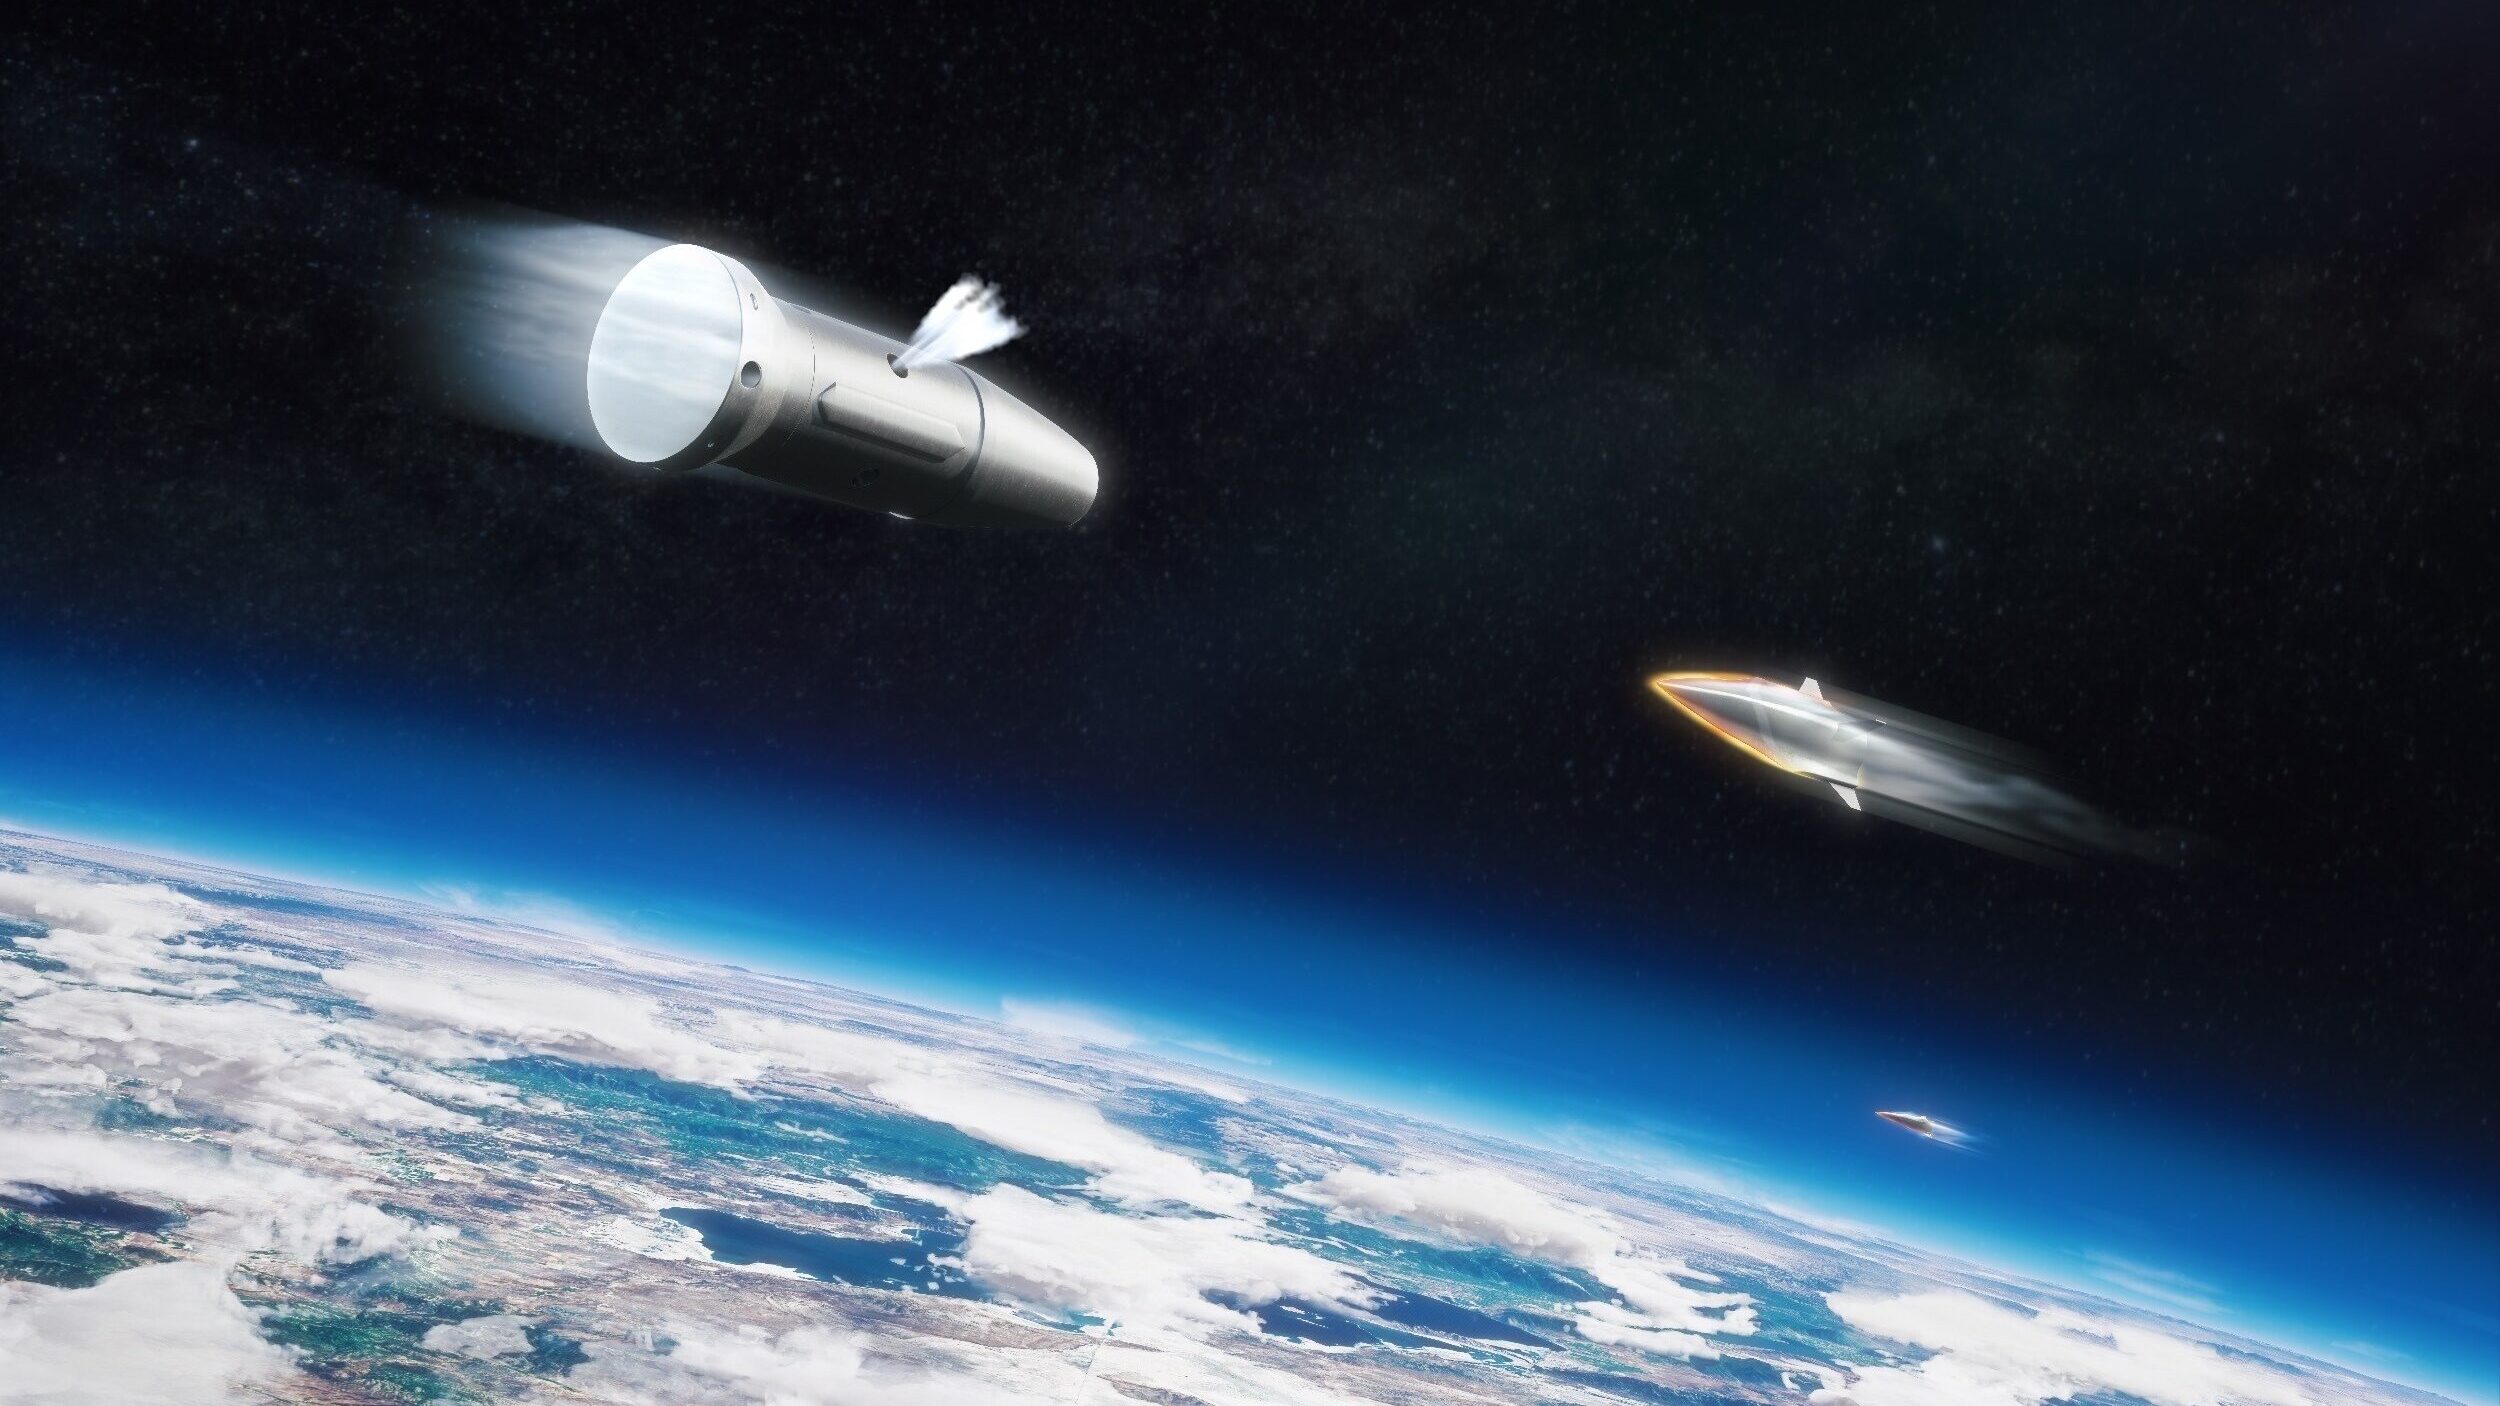 Aquila, a counter-hypersonic interception capability building on new technologies in all critical domains.